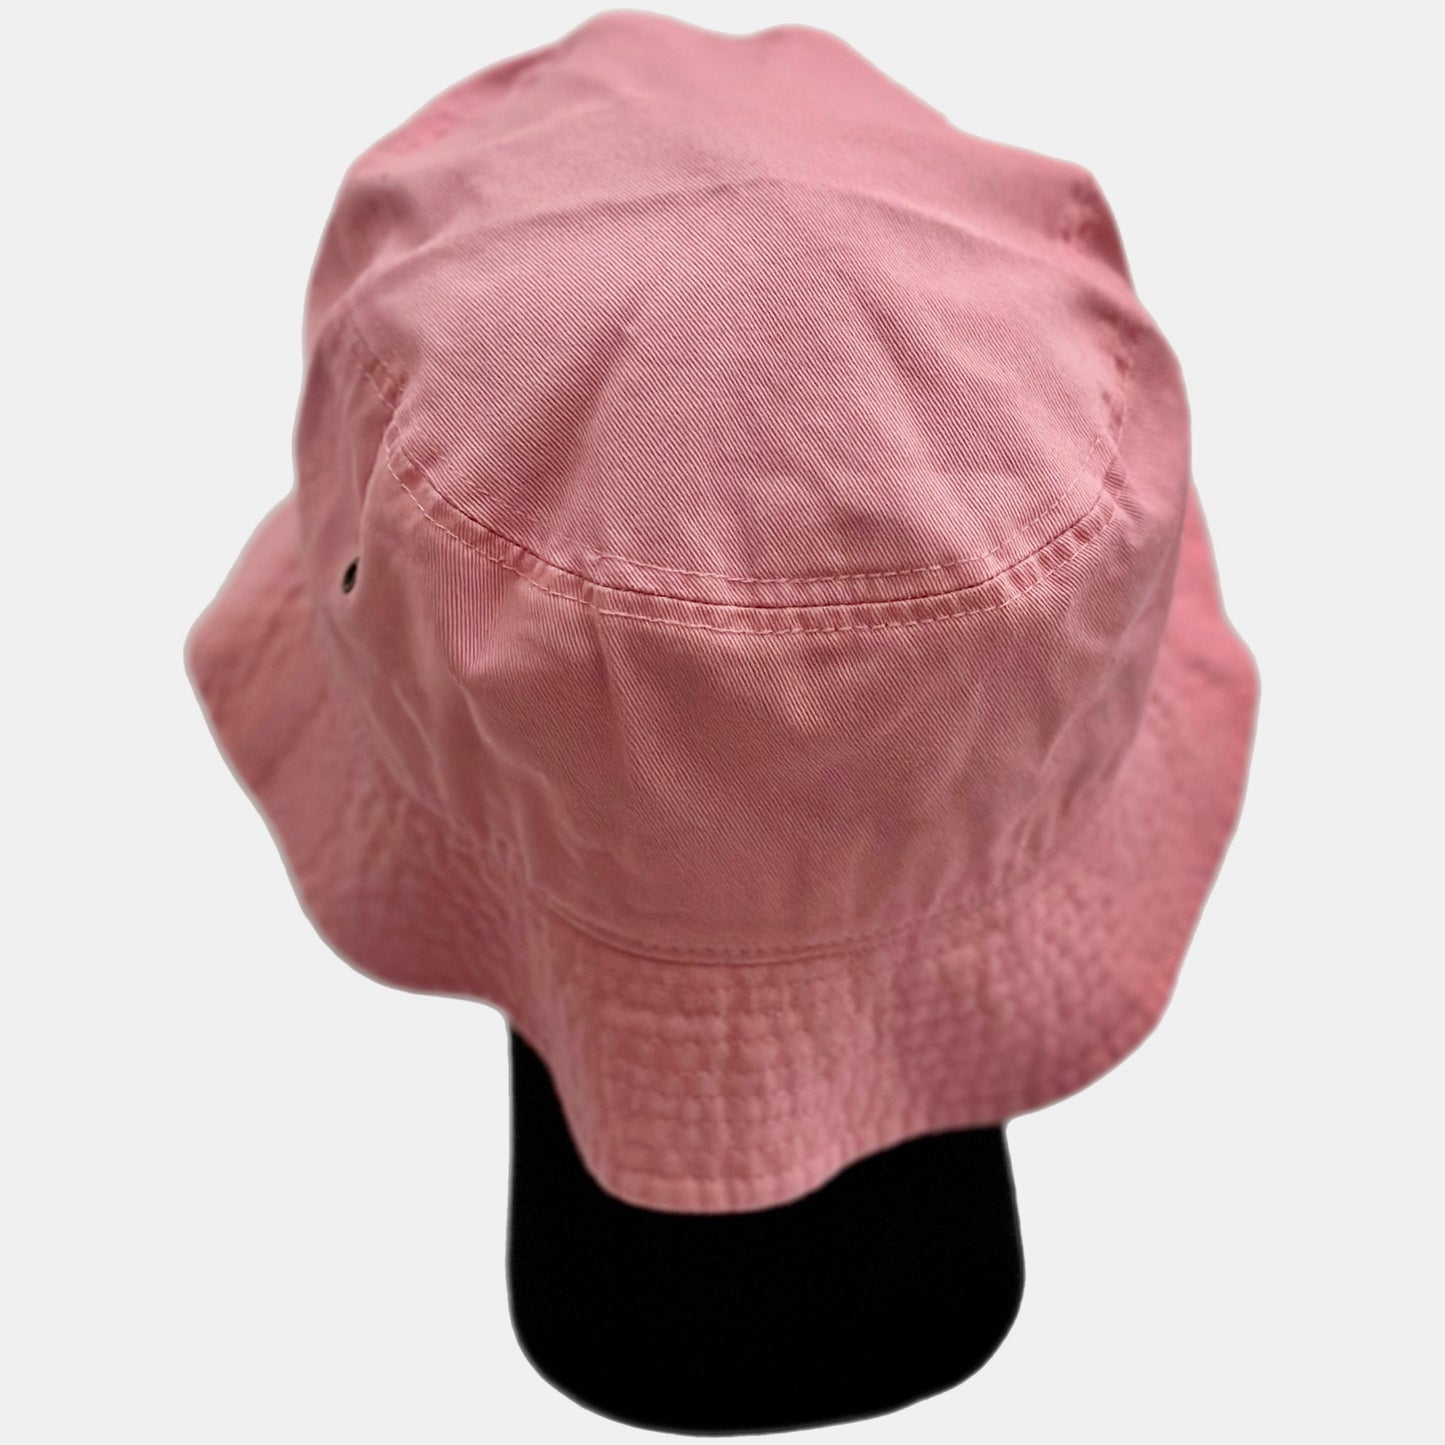 Pink "Gabby B" Embroidered Bucket Hat